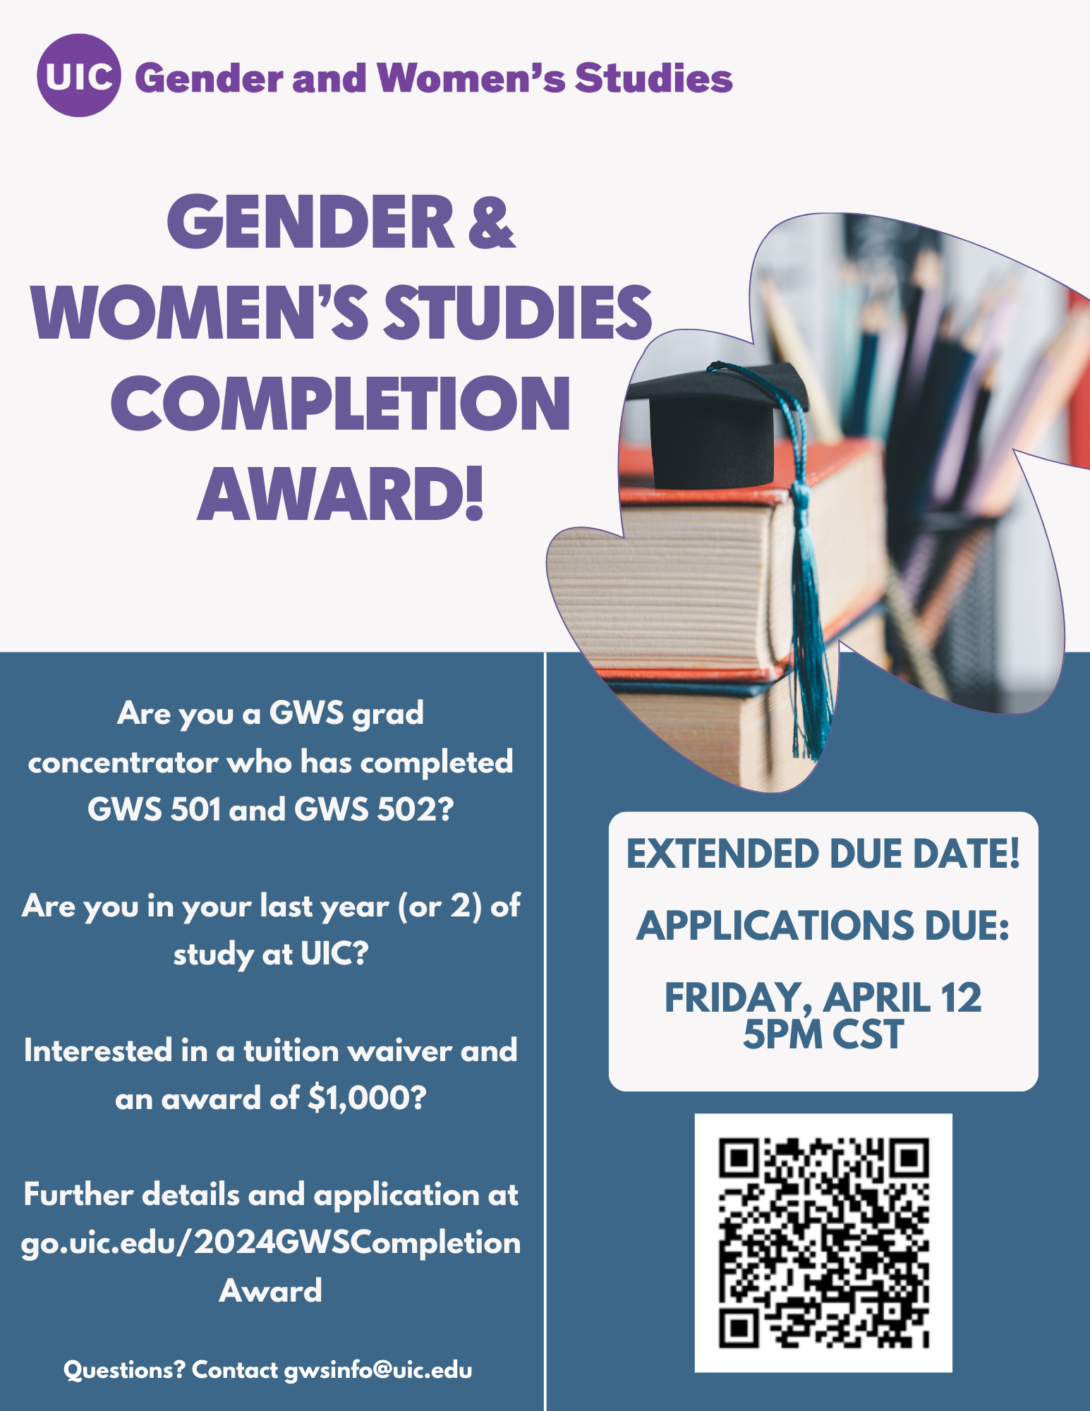 A flyer explaining the GWS Completion Award, application criteria, deadline, and application instructions, link, and QR code. The bottom half of the flyer has a purple background and white text. The top half of the flyer has a white background and teal text. On the right, top half of the flyer is an image of a stack of books with a small black graduation cap with a teal tassel sitting on top of the books and colored pencils in a pencil holder in the background in an asymmetrical cutout design. The GWS logo in teal appears in the top left portion of the flyer.